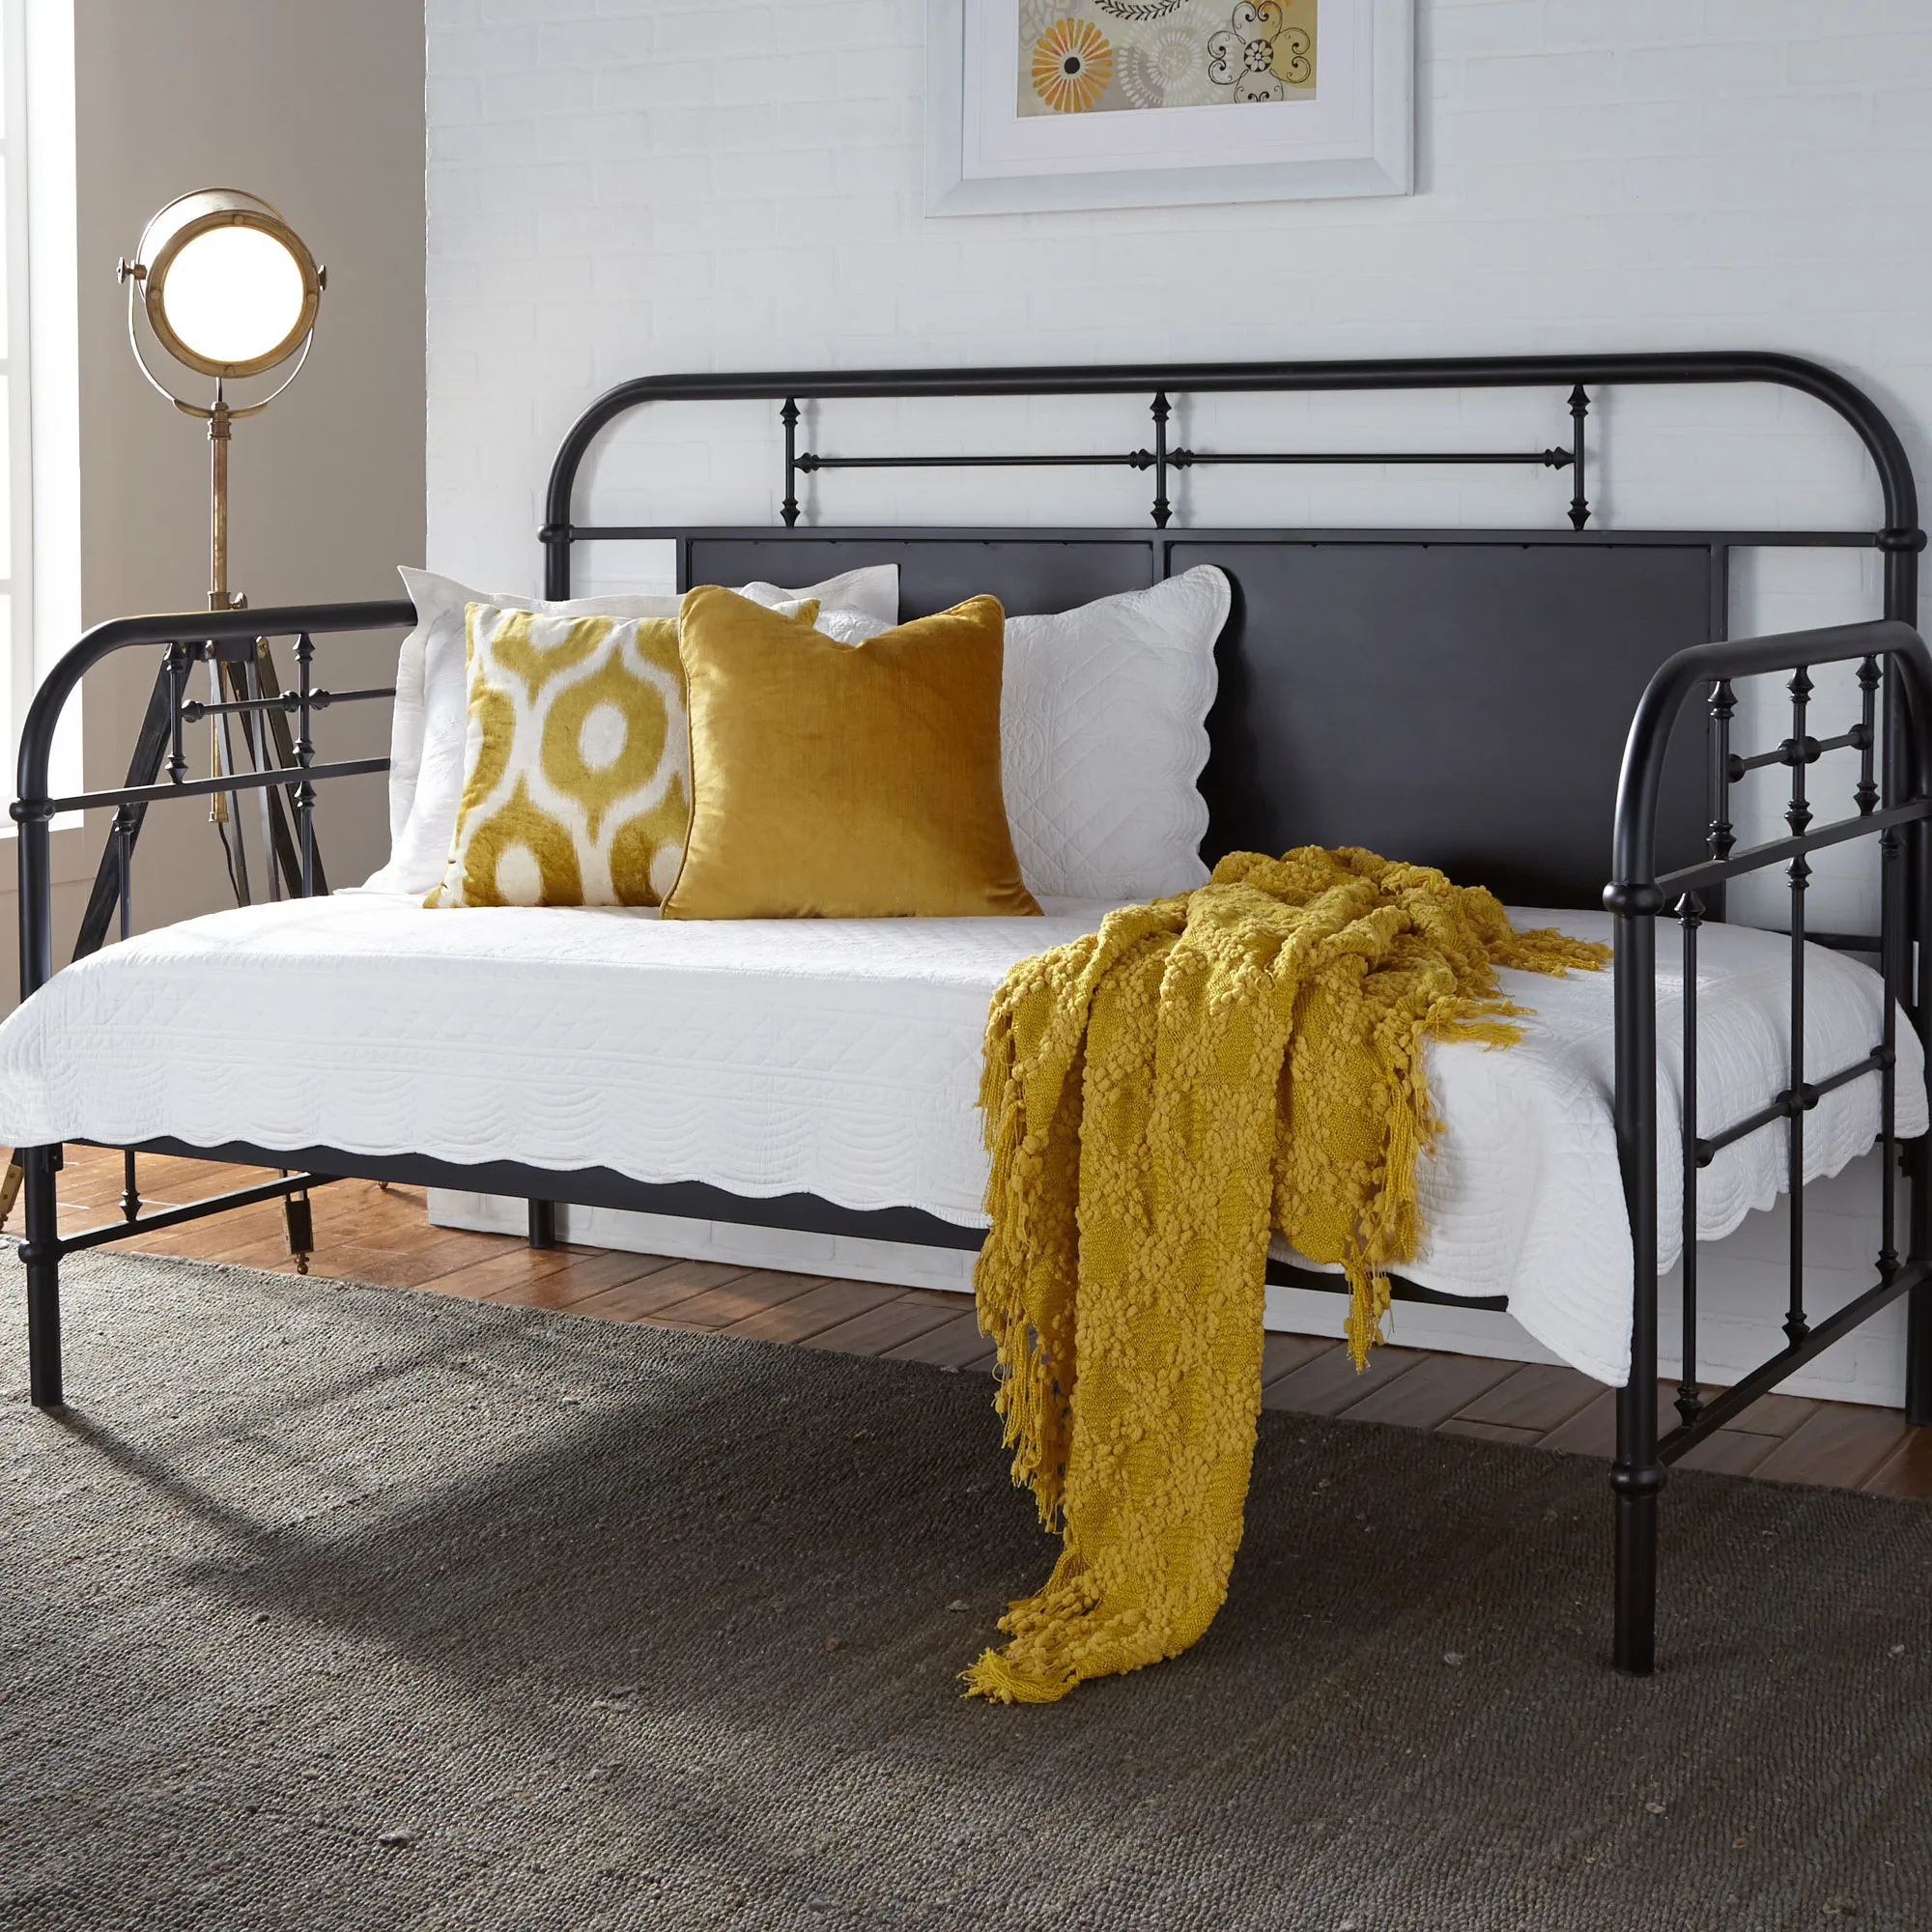 LIBERTY: INCHVINTAGE SERIESINCH BLACK DAYBED